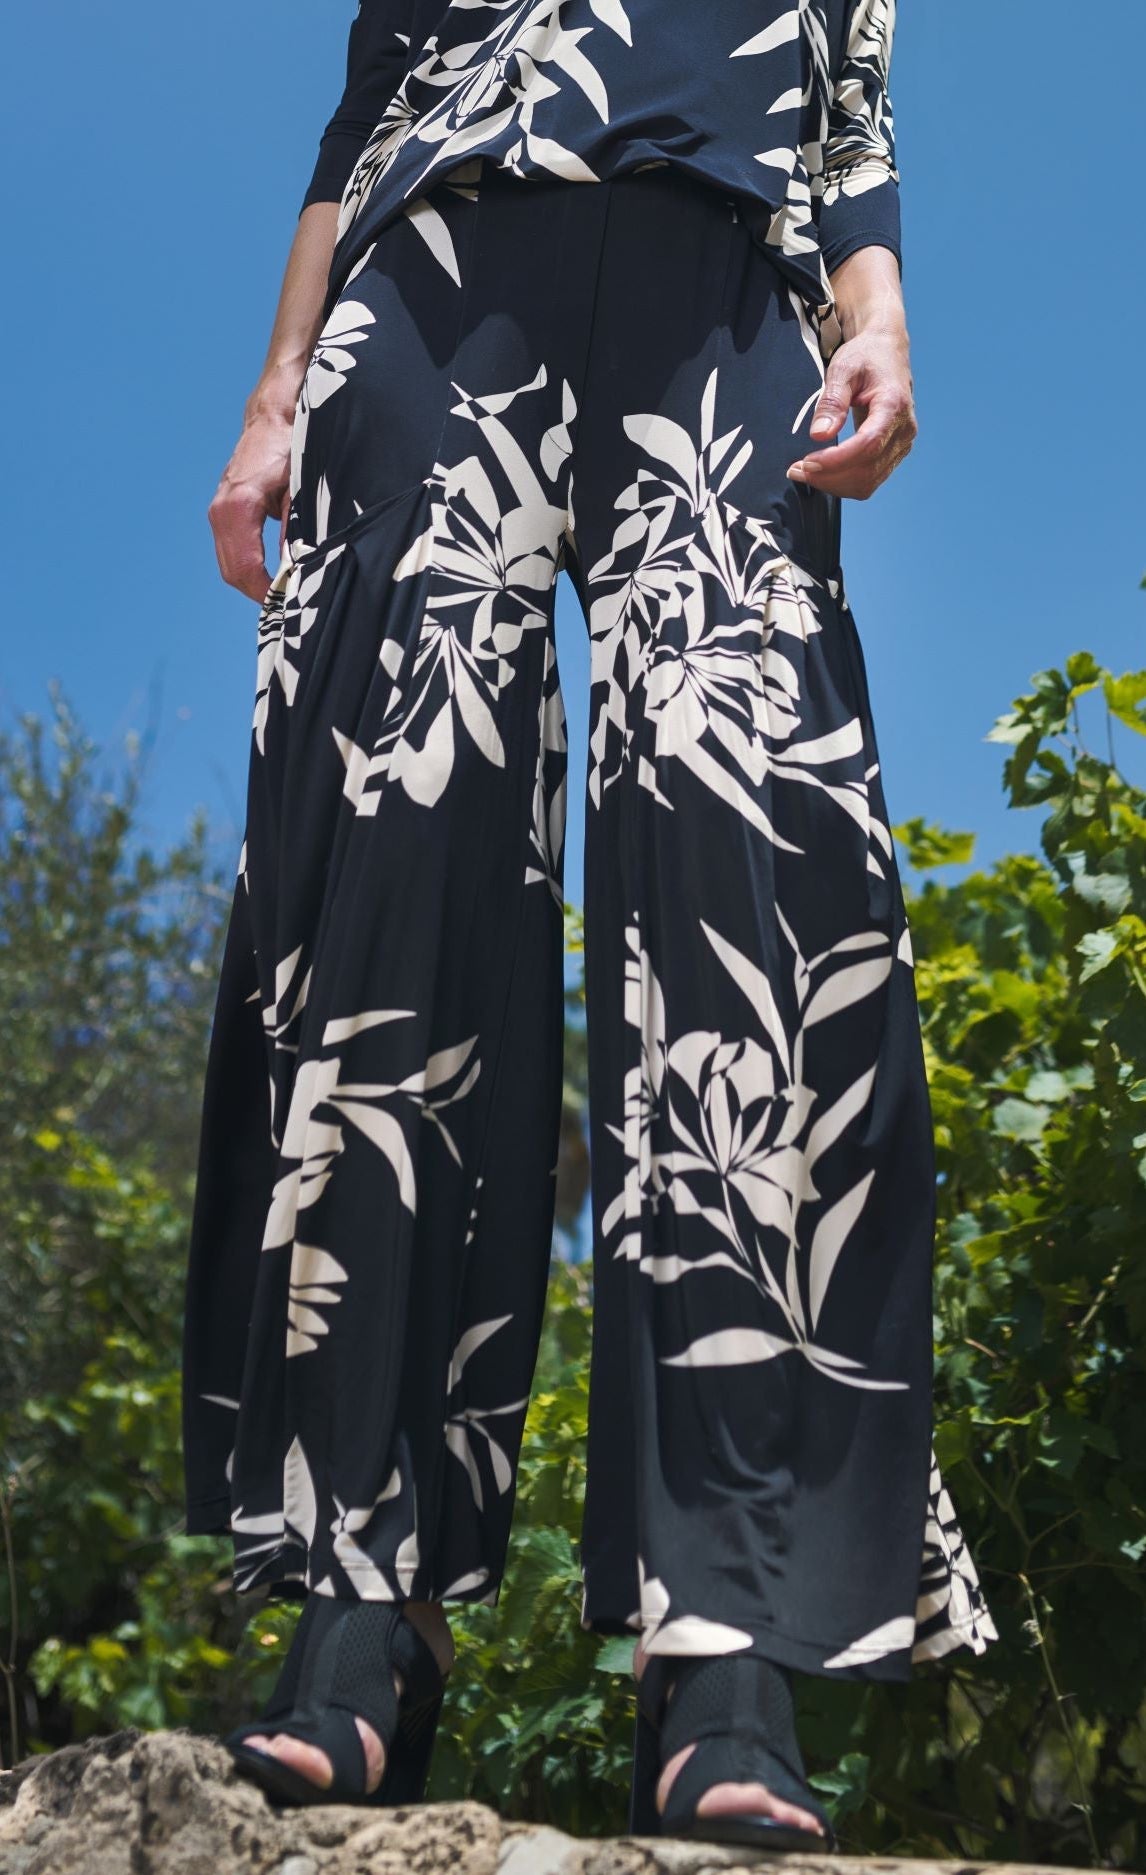 Front bottom half view of a woman wearing the floral bendetta palazzo pants